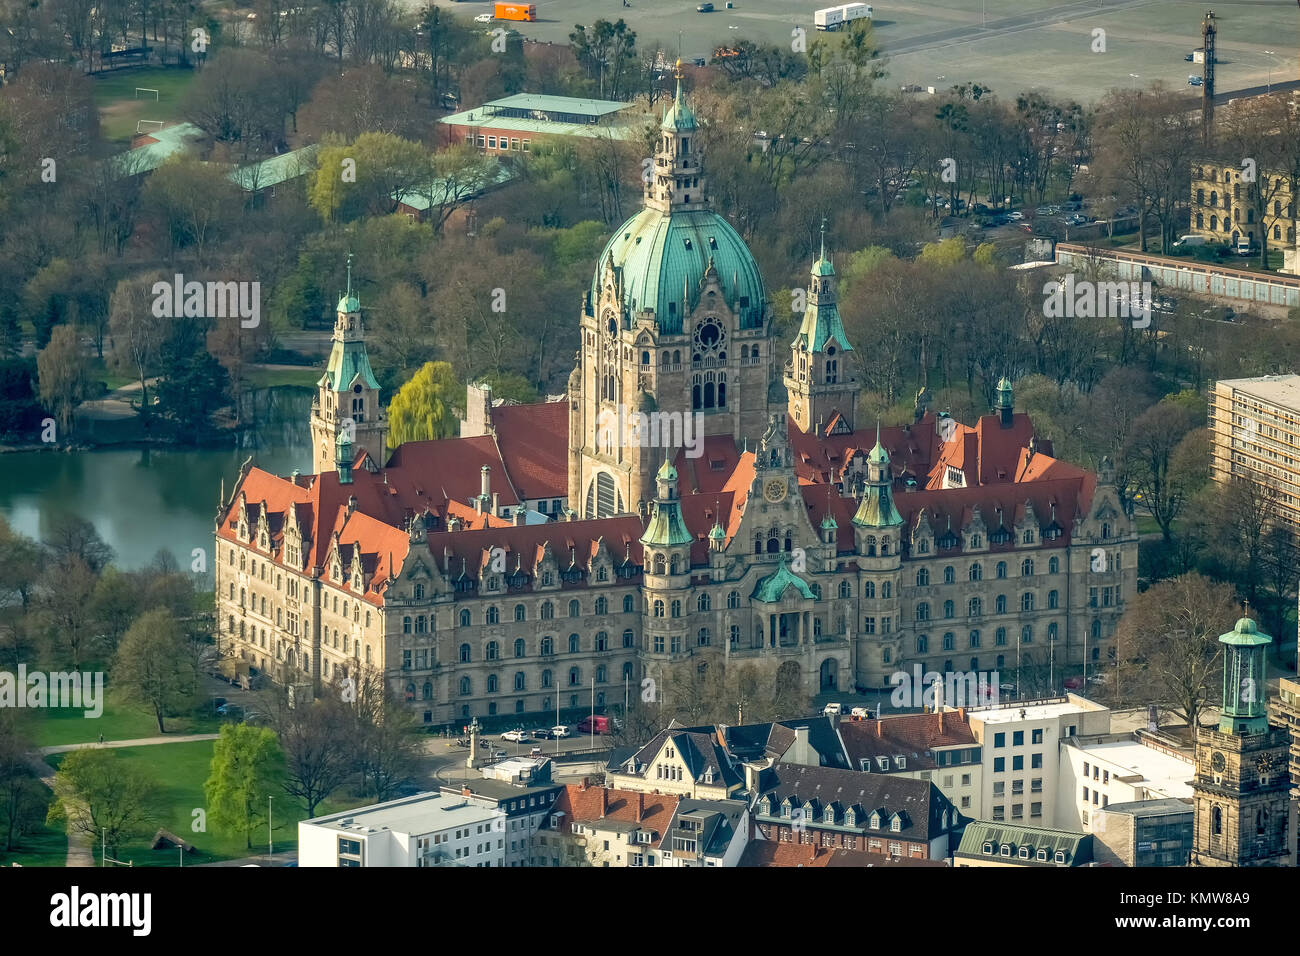 Neues Rathaus, Hanover landmark, Wilhelmine, castle-like magnificent building in eclectic style, City Council, City Hall dome, Hanover, state capital, Stock Photo